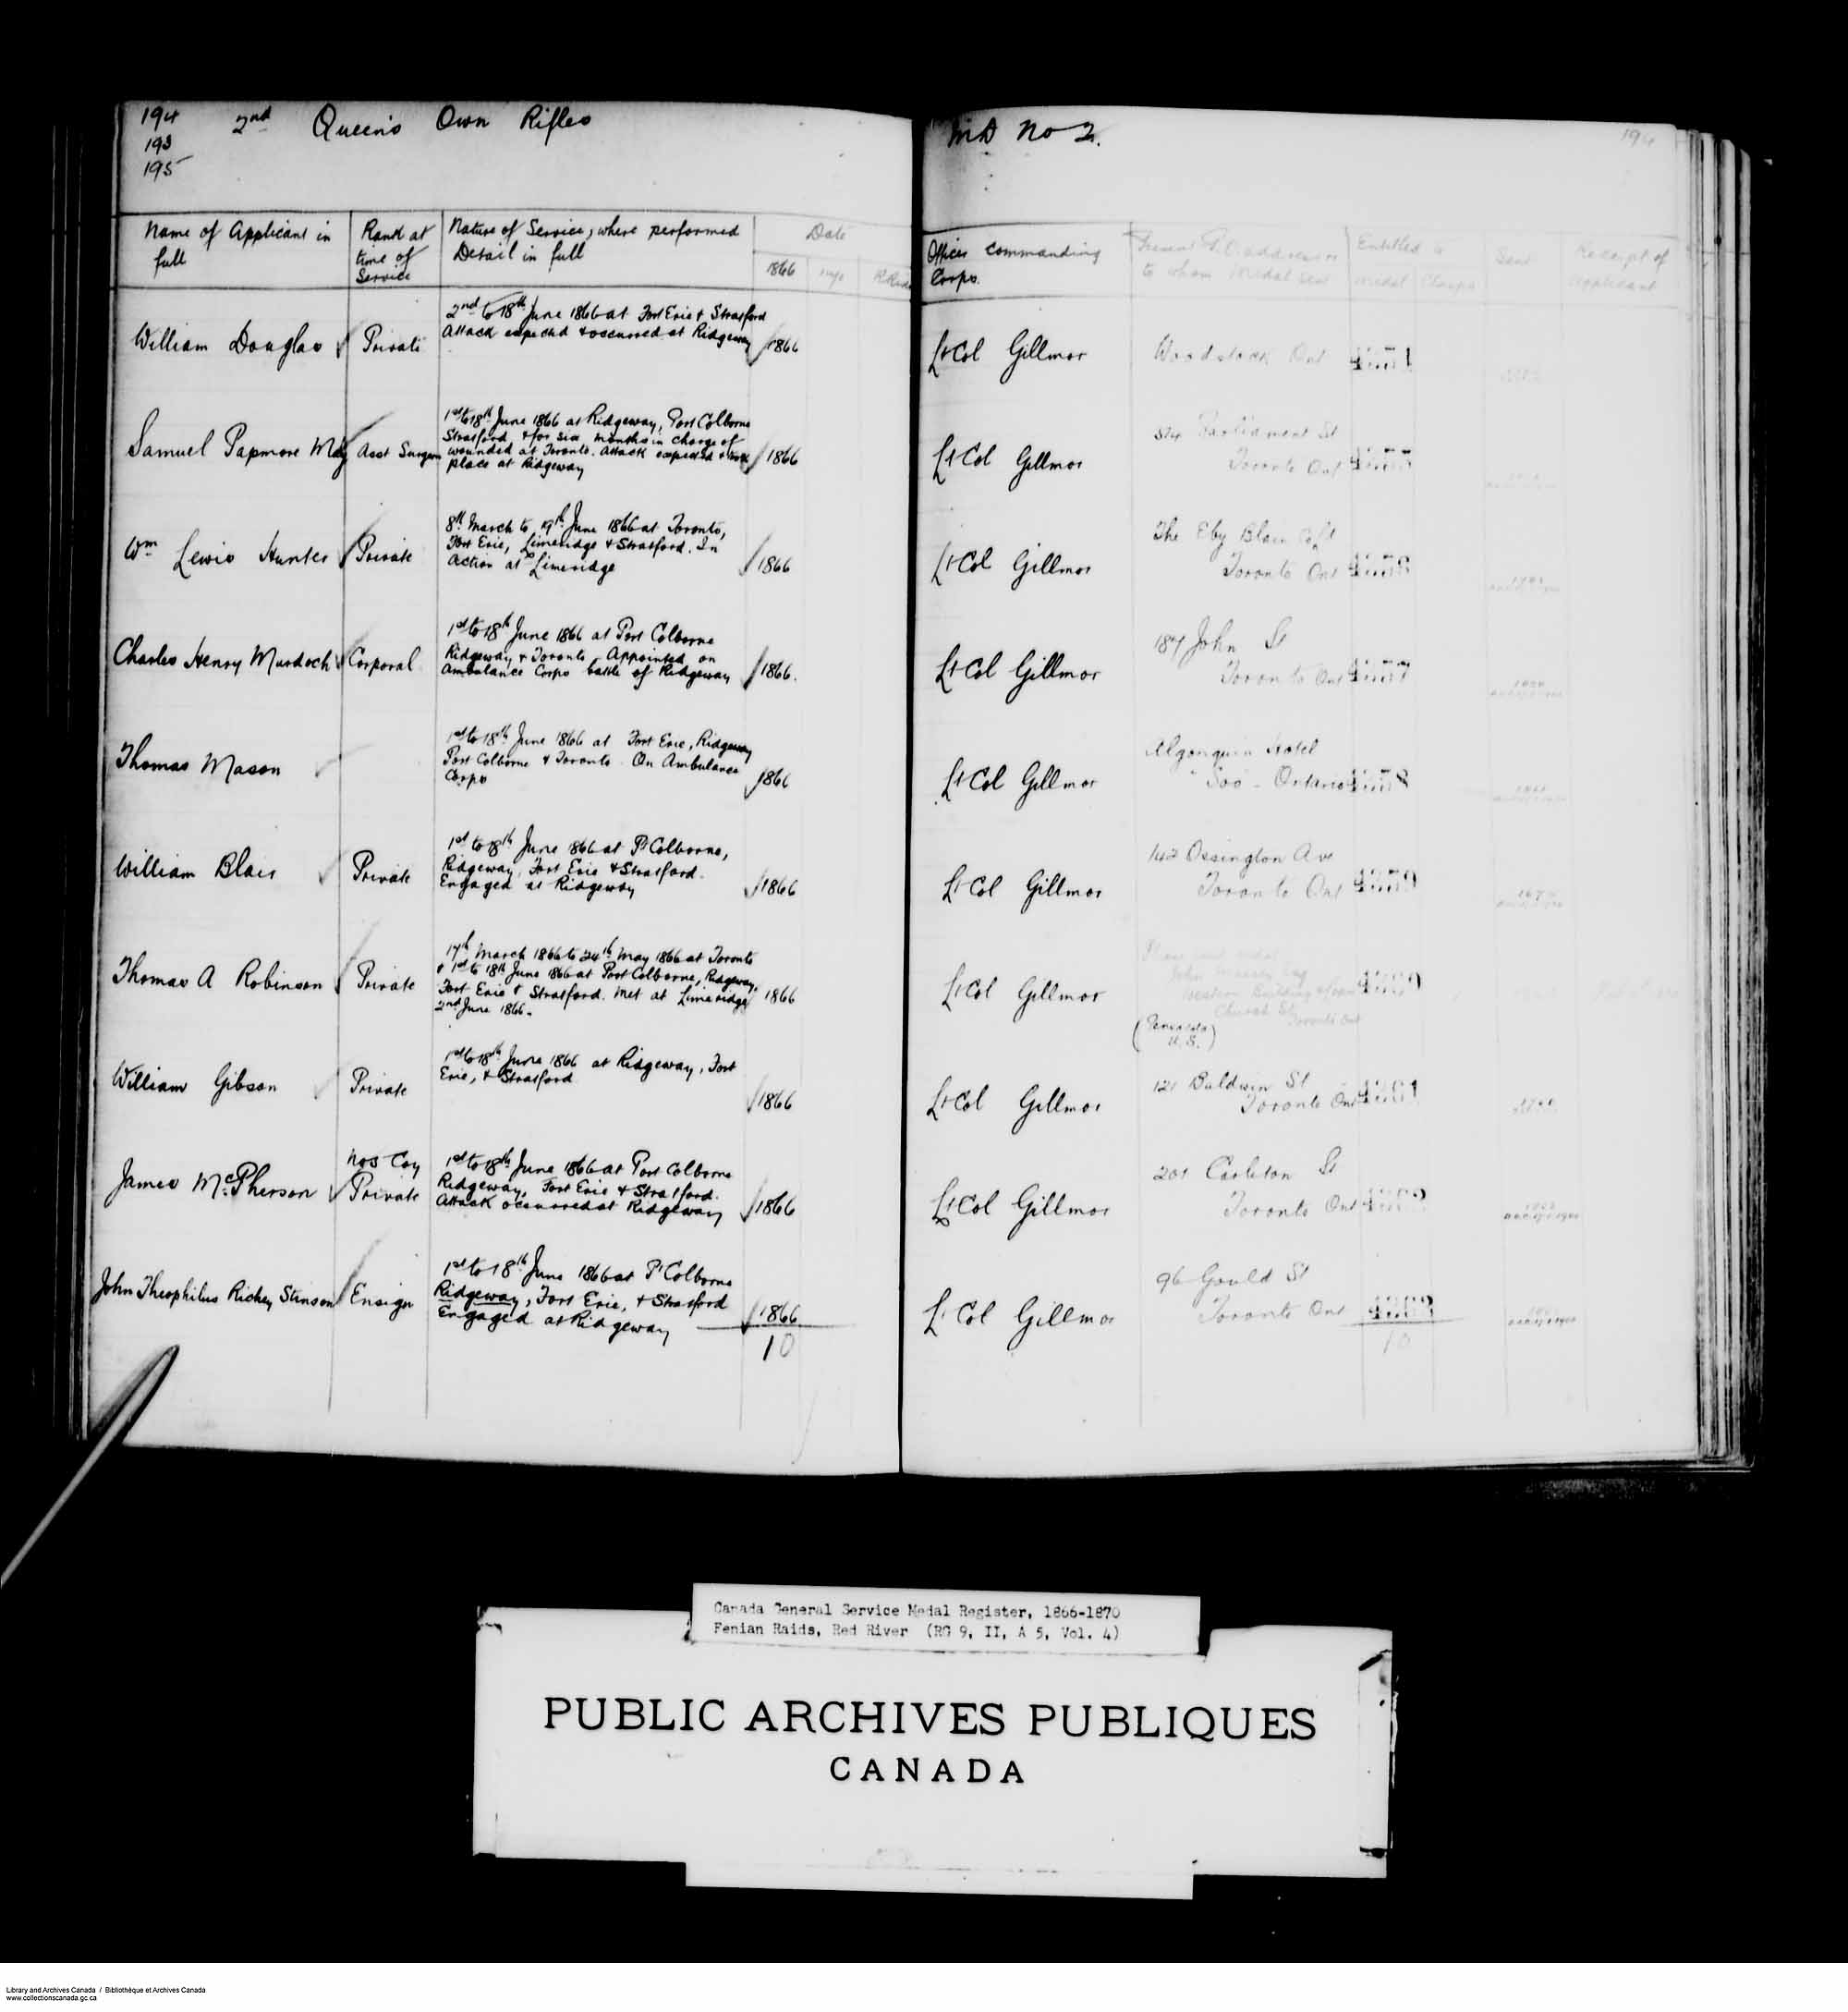 Digitized page of Medals, Honours and Awards for Image No.: e008681881